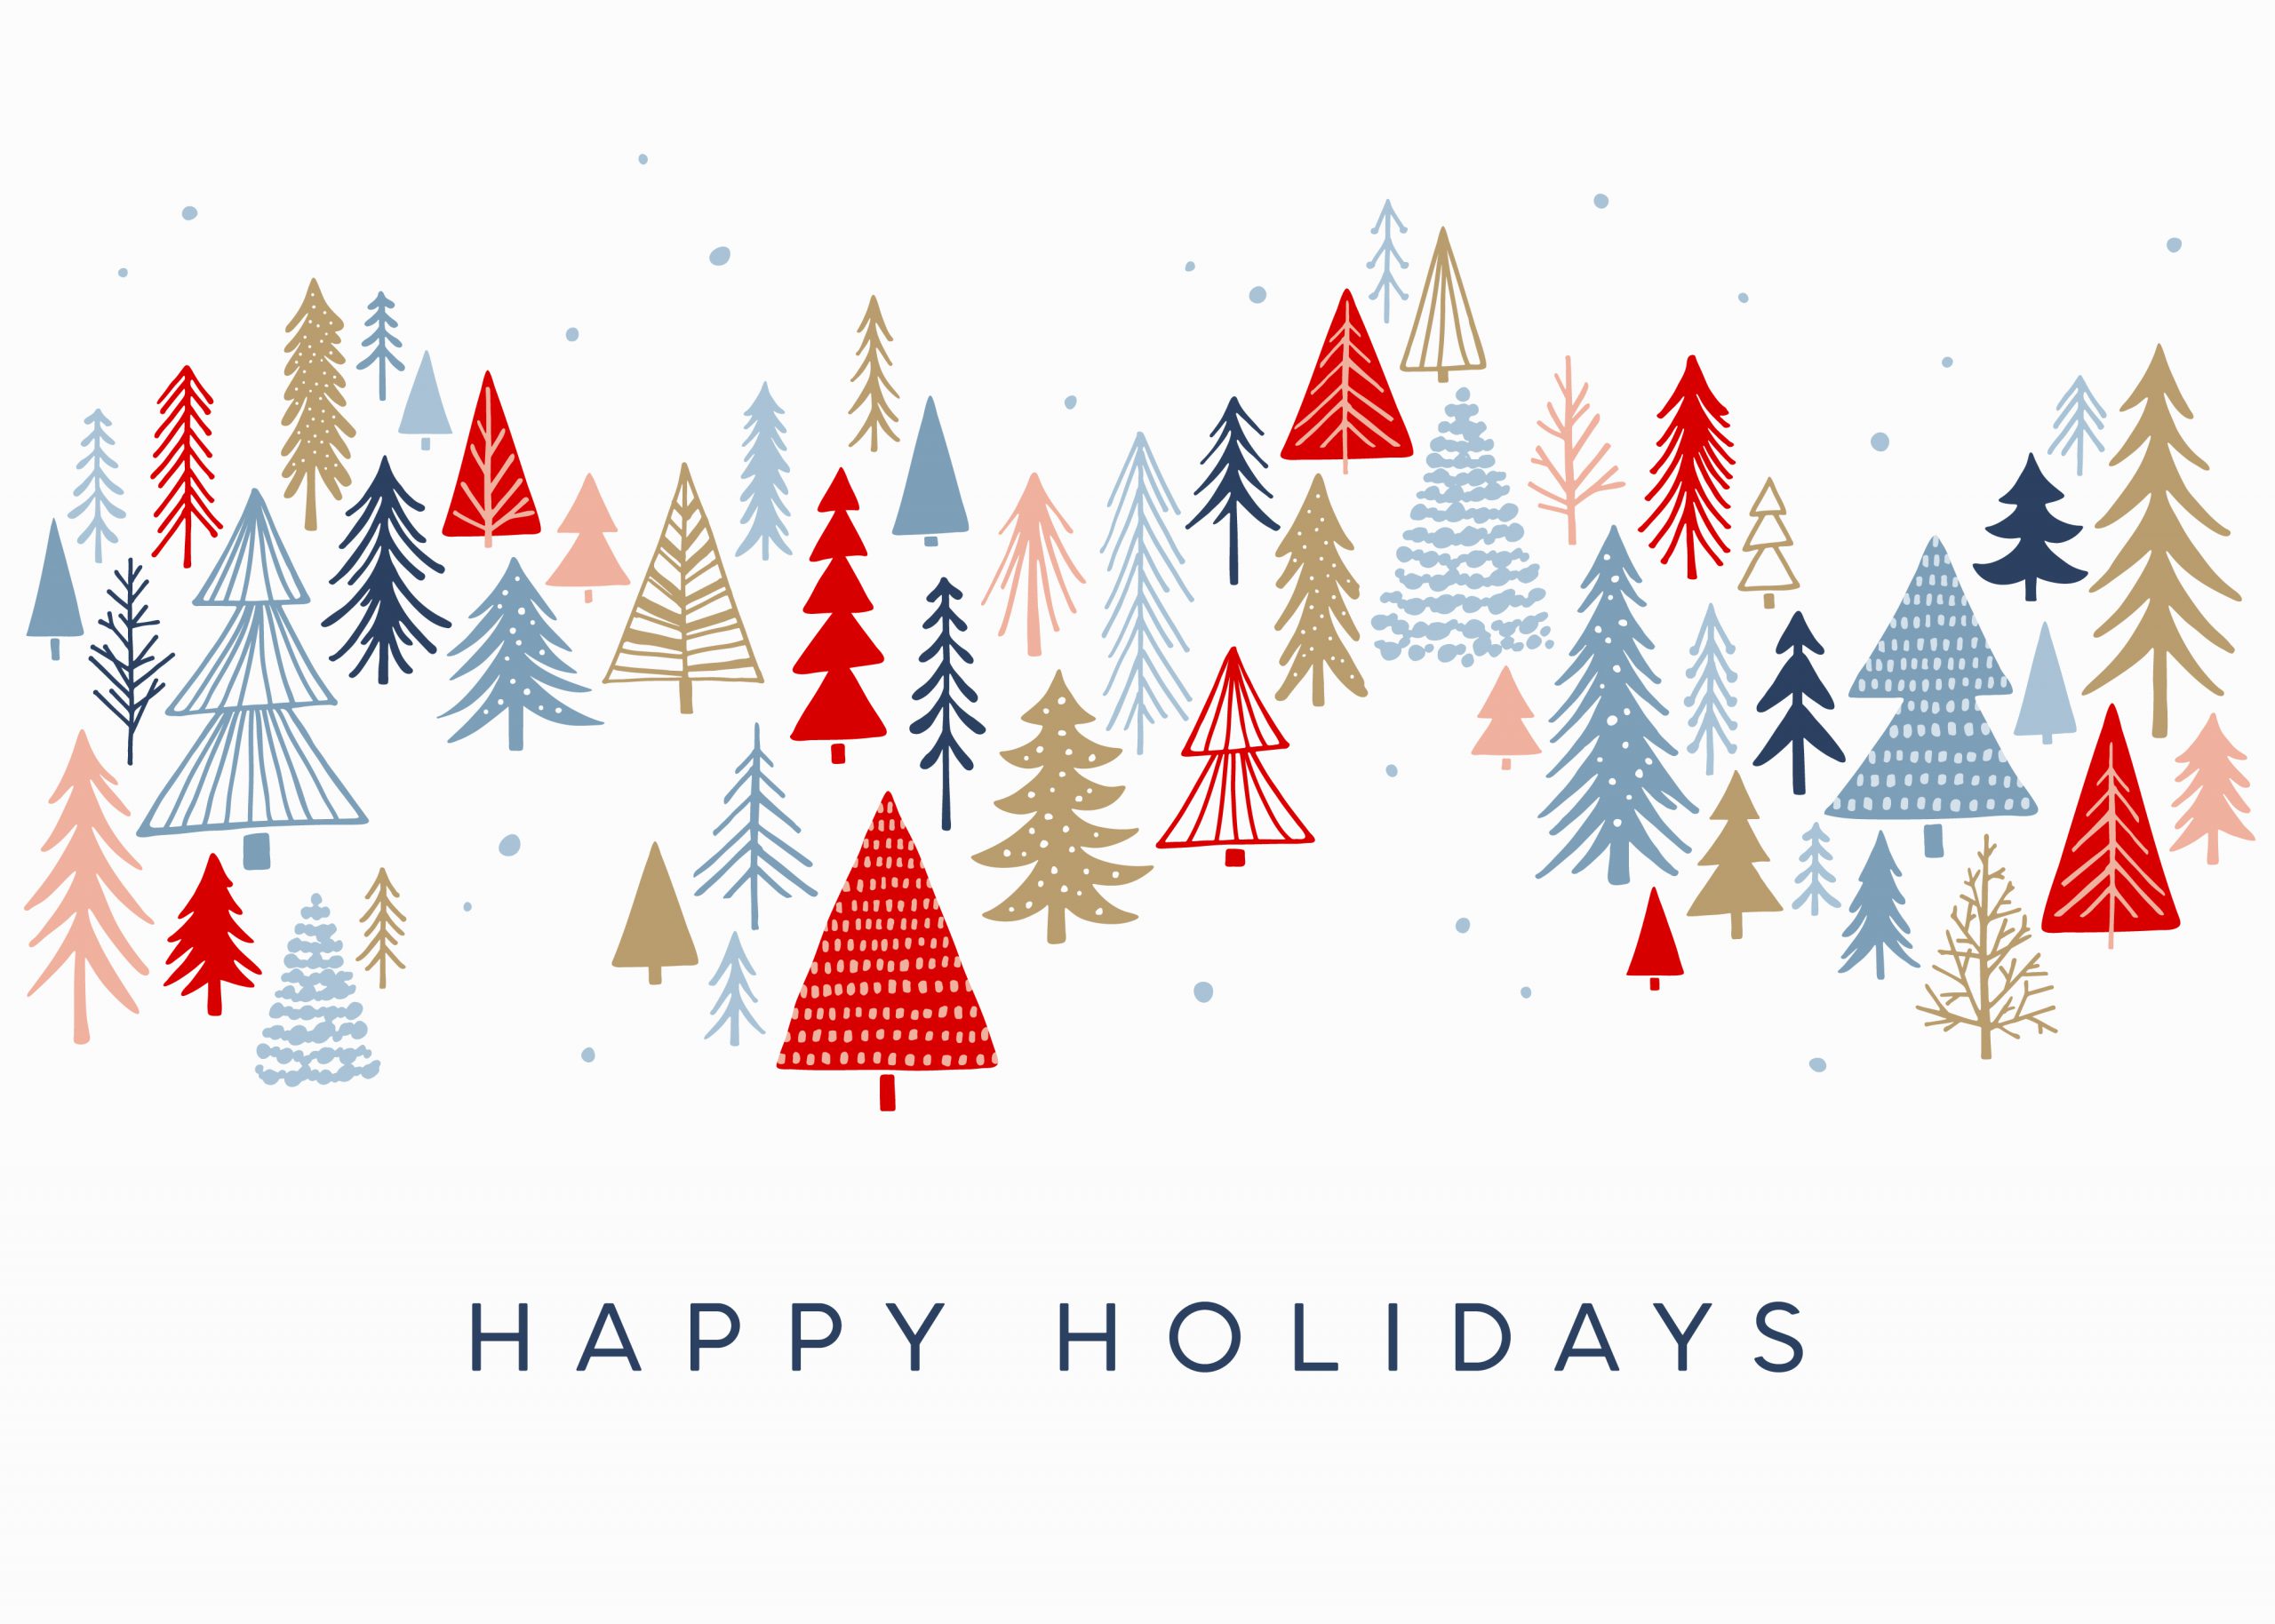 Holiday card with trees and snow. Christmas background with winter trees.